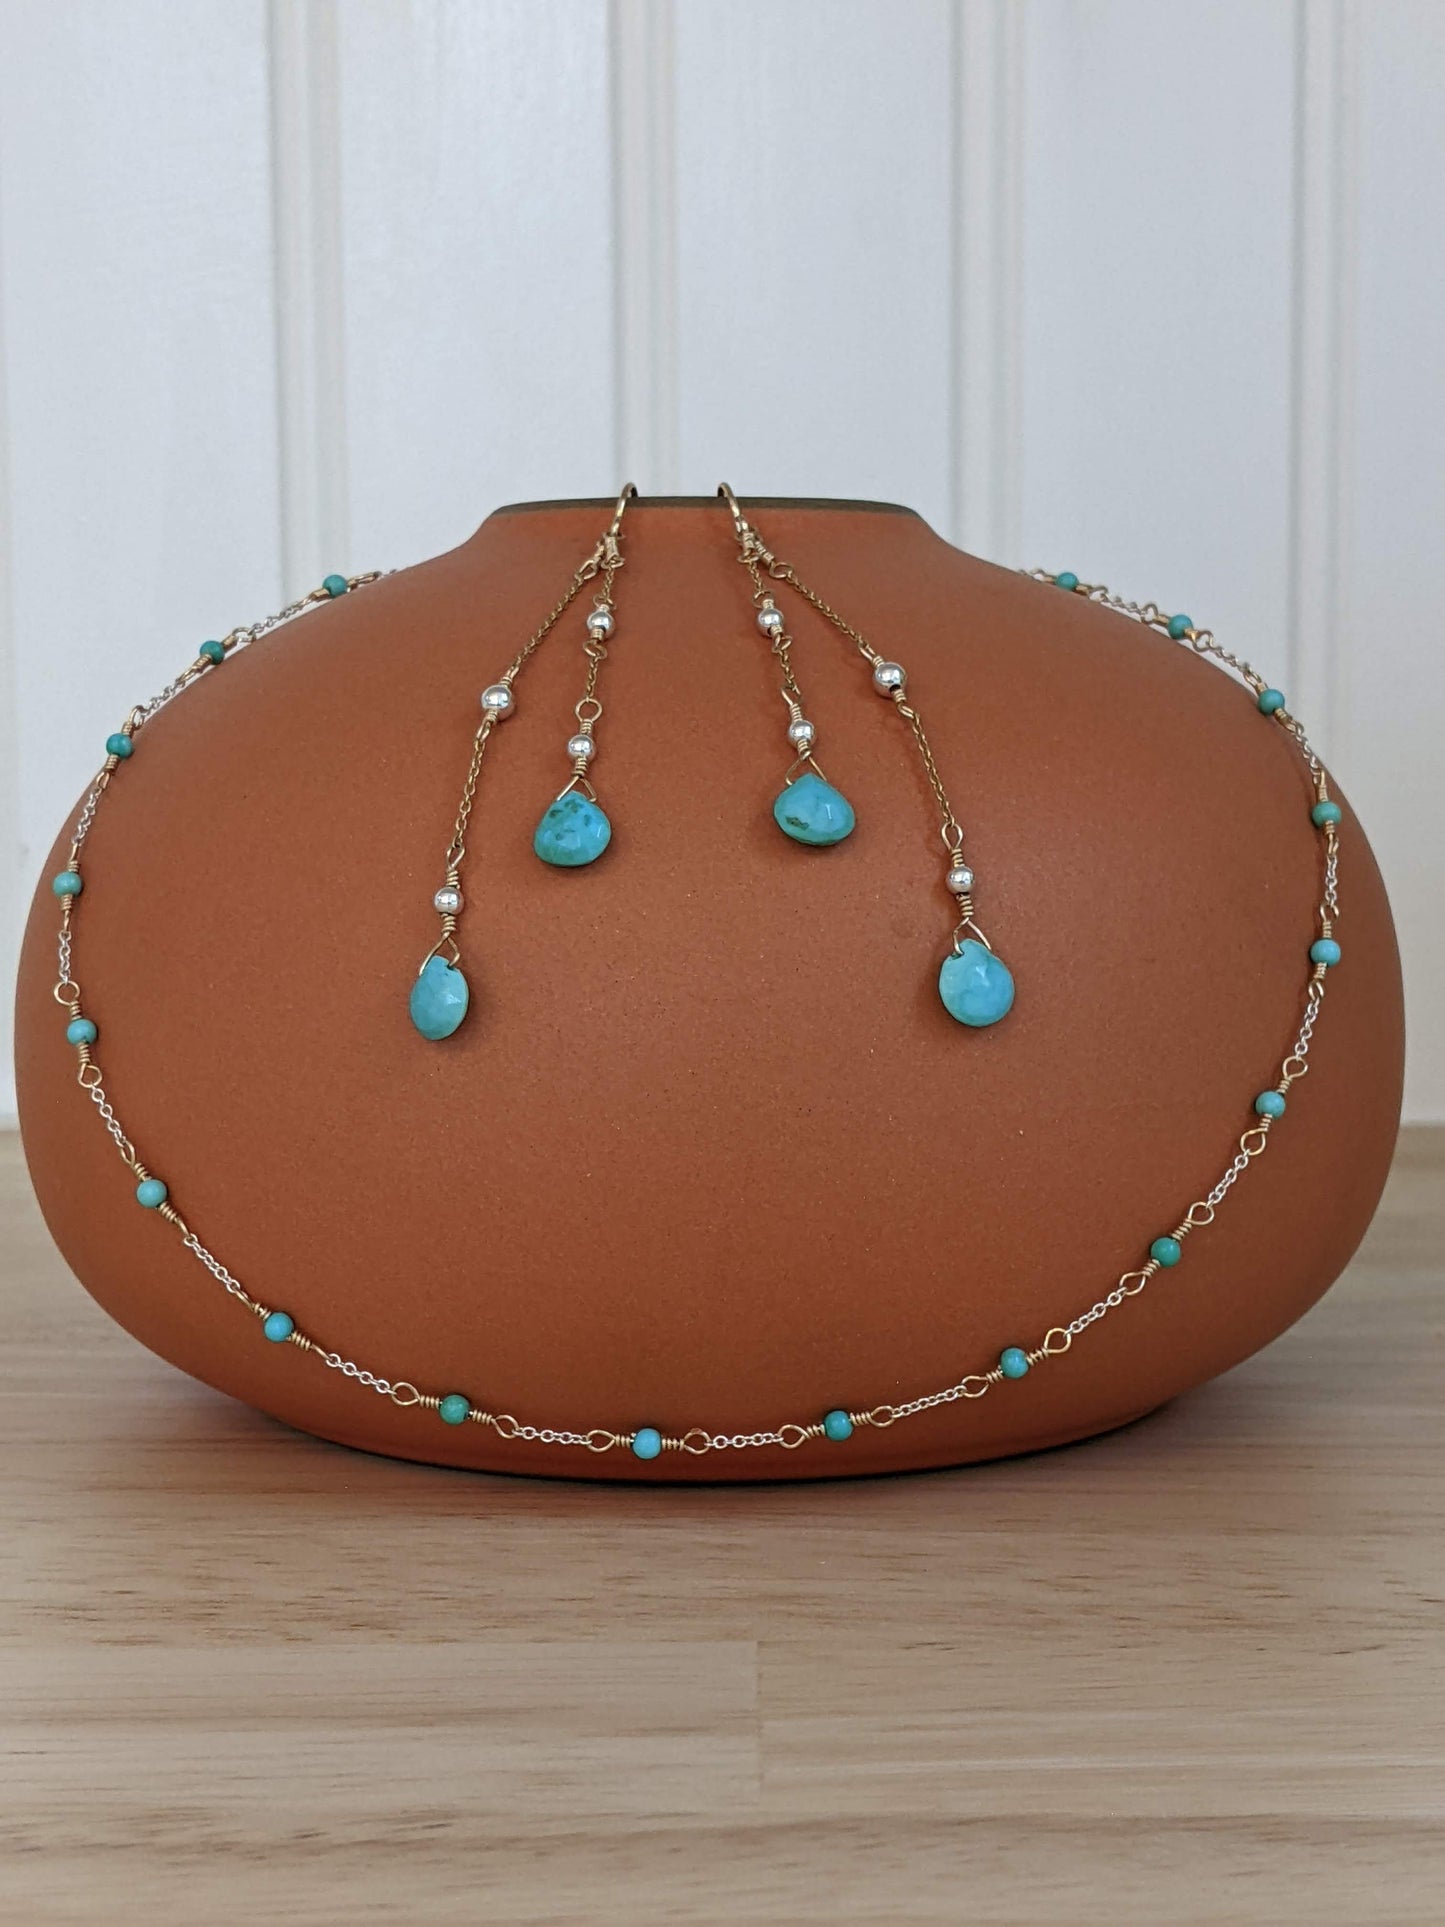 The Jacqueline Necklace in Turquoise with Mixed Metals